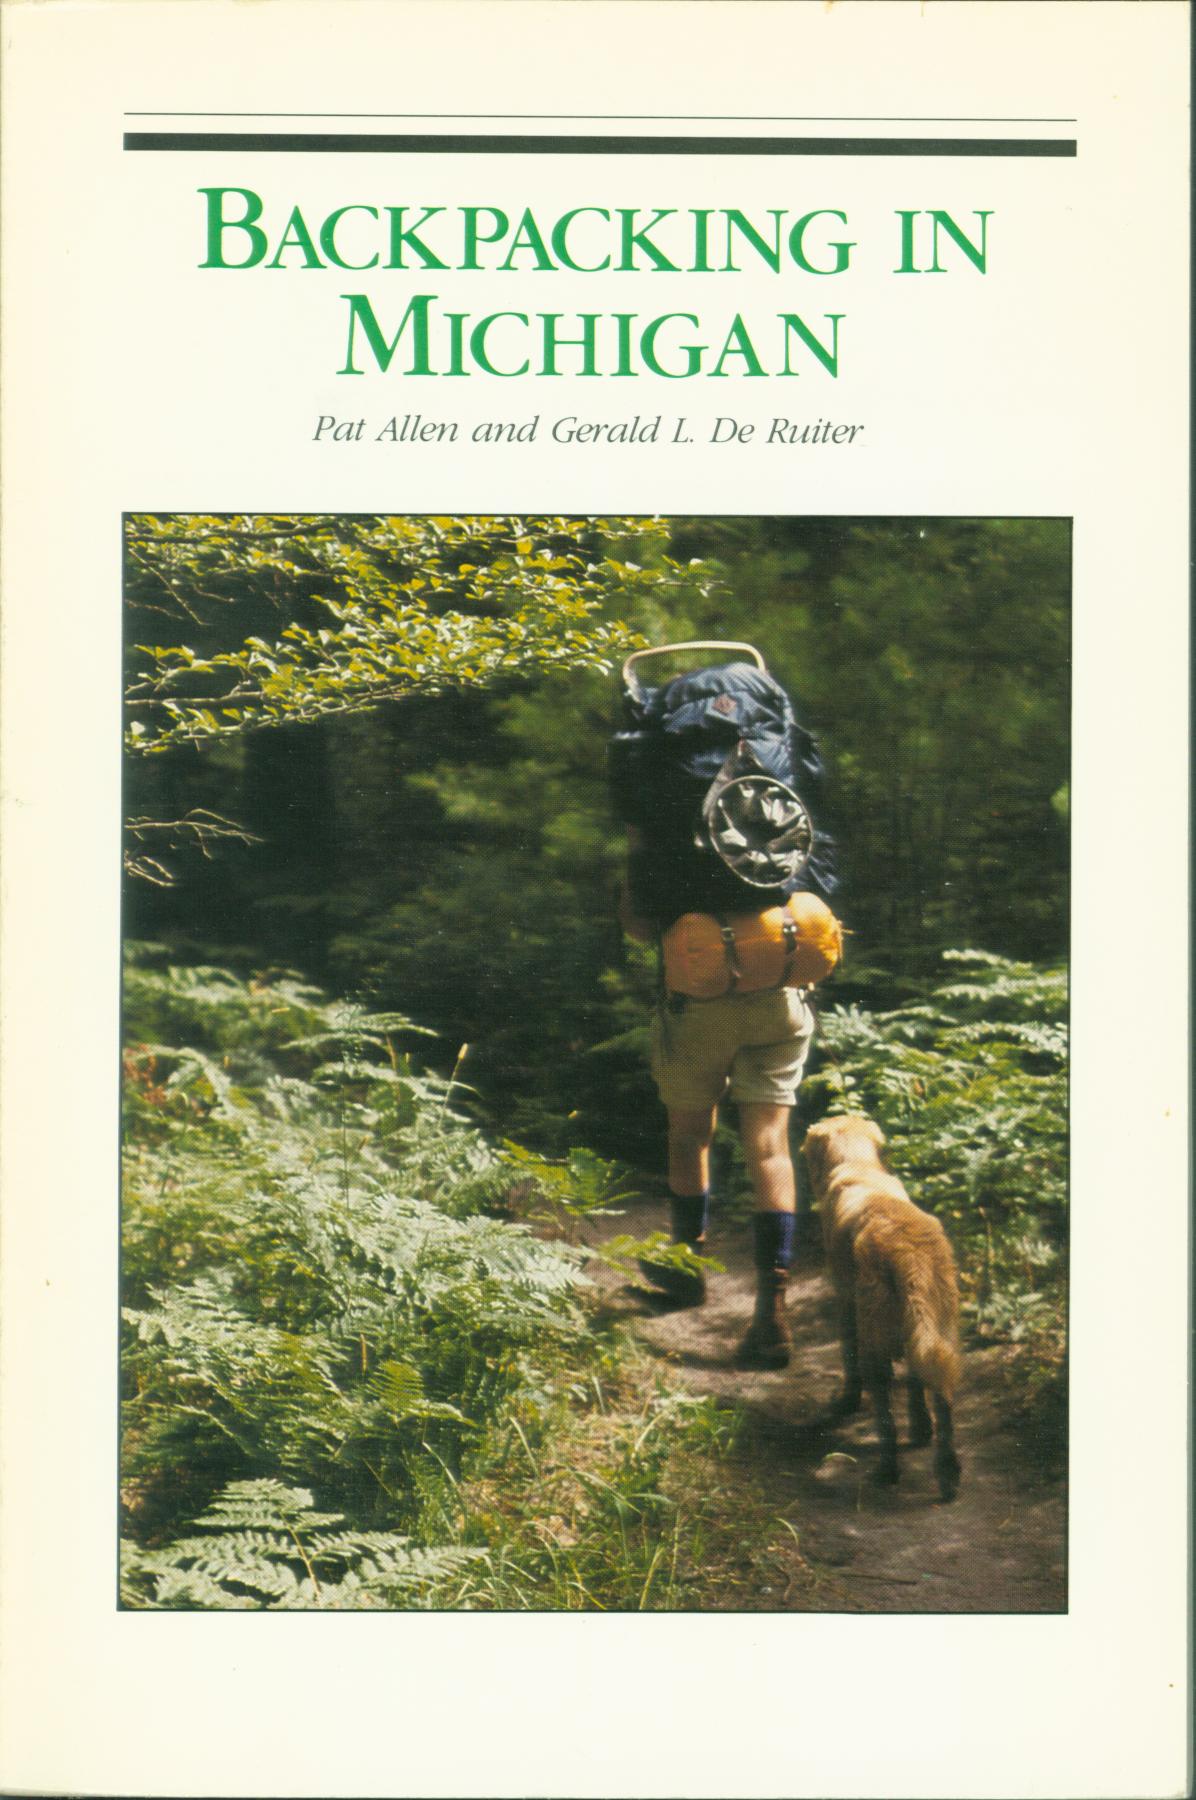 BACKPACKING IN MICHIGAN. 